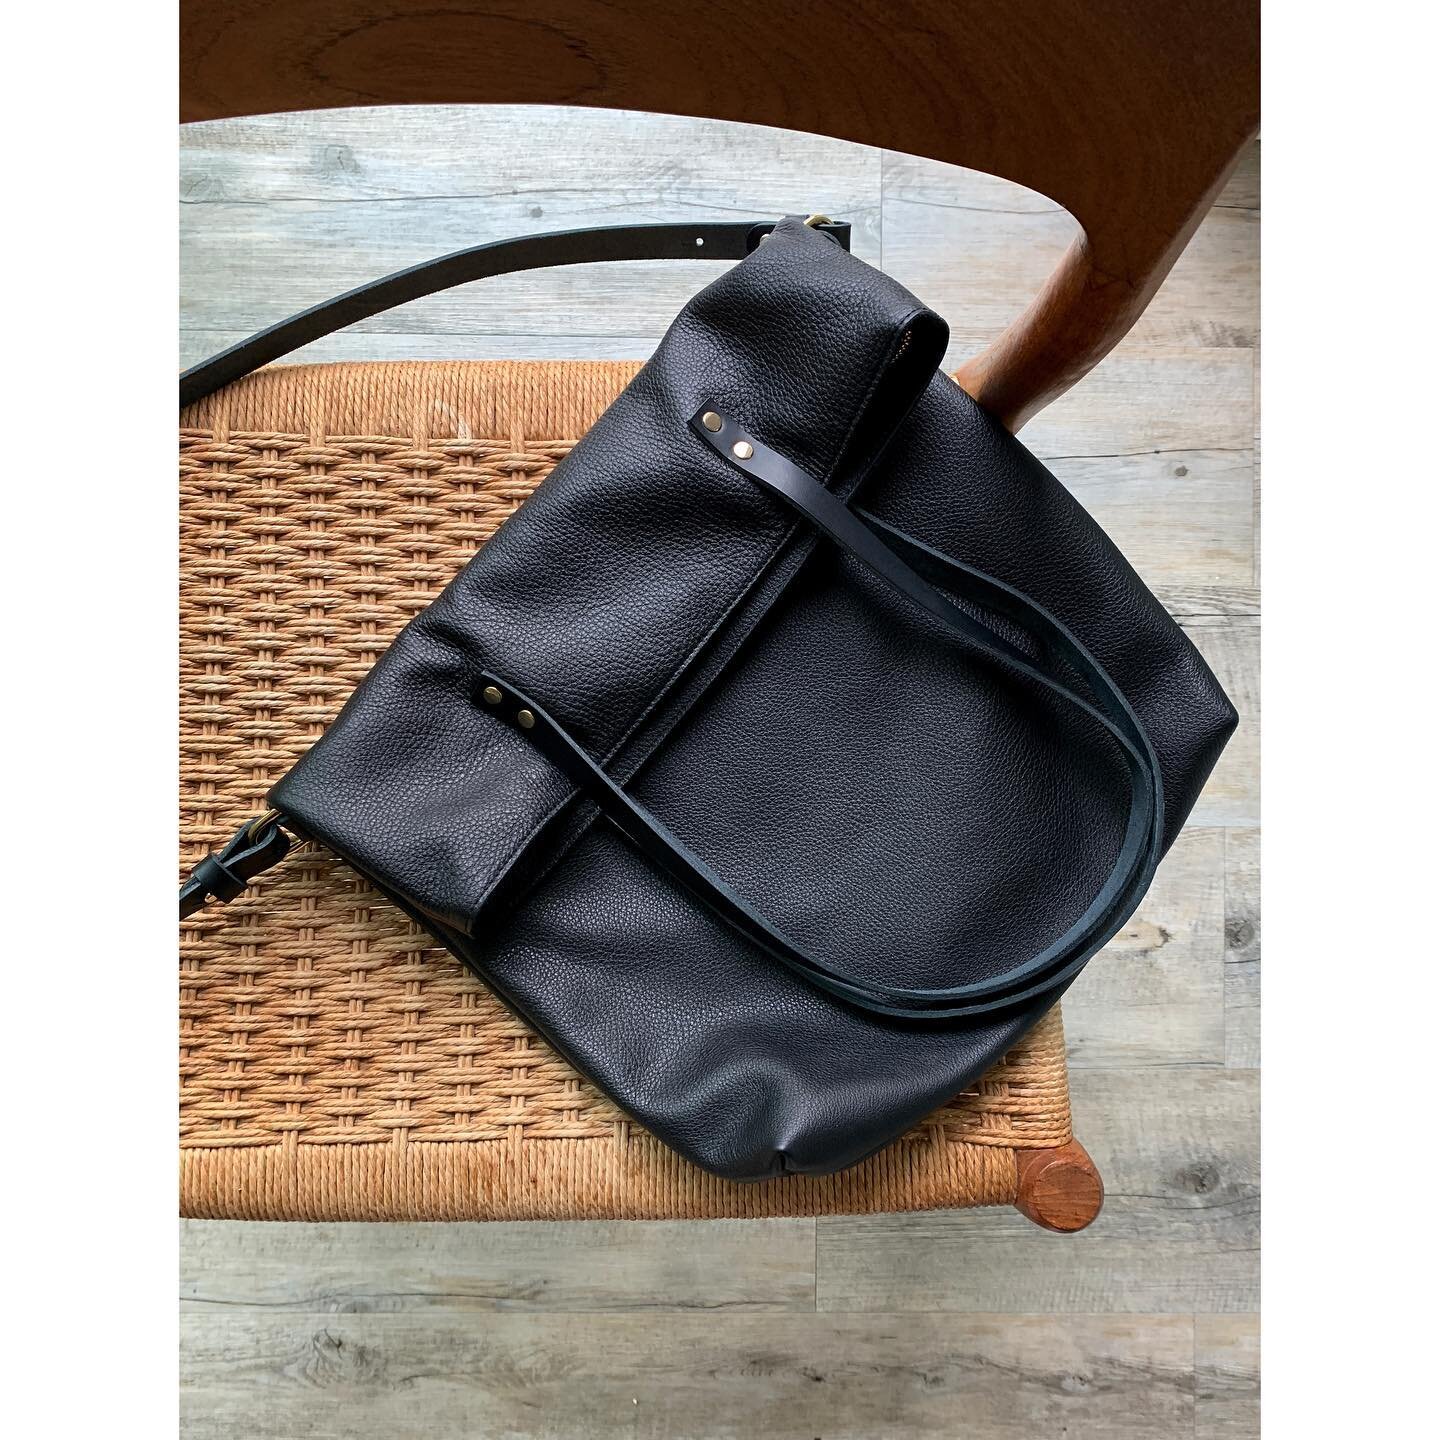 BACK IN STOCK: the black + gold variant of our &bdquo;M crossbody&ldquo;.
Made with finest, soft and warm grainleather from Scandinavia. 
You can order it with a complete zipper or without. All bags have a cotton inner lining and an inner pocket with